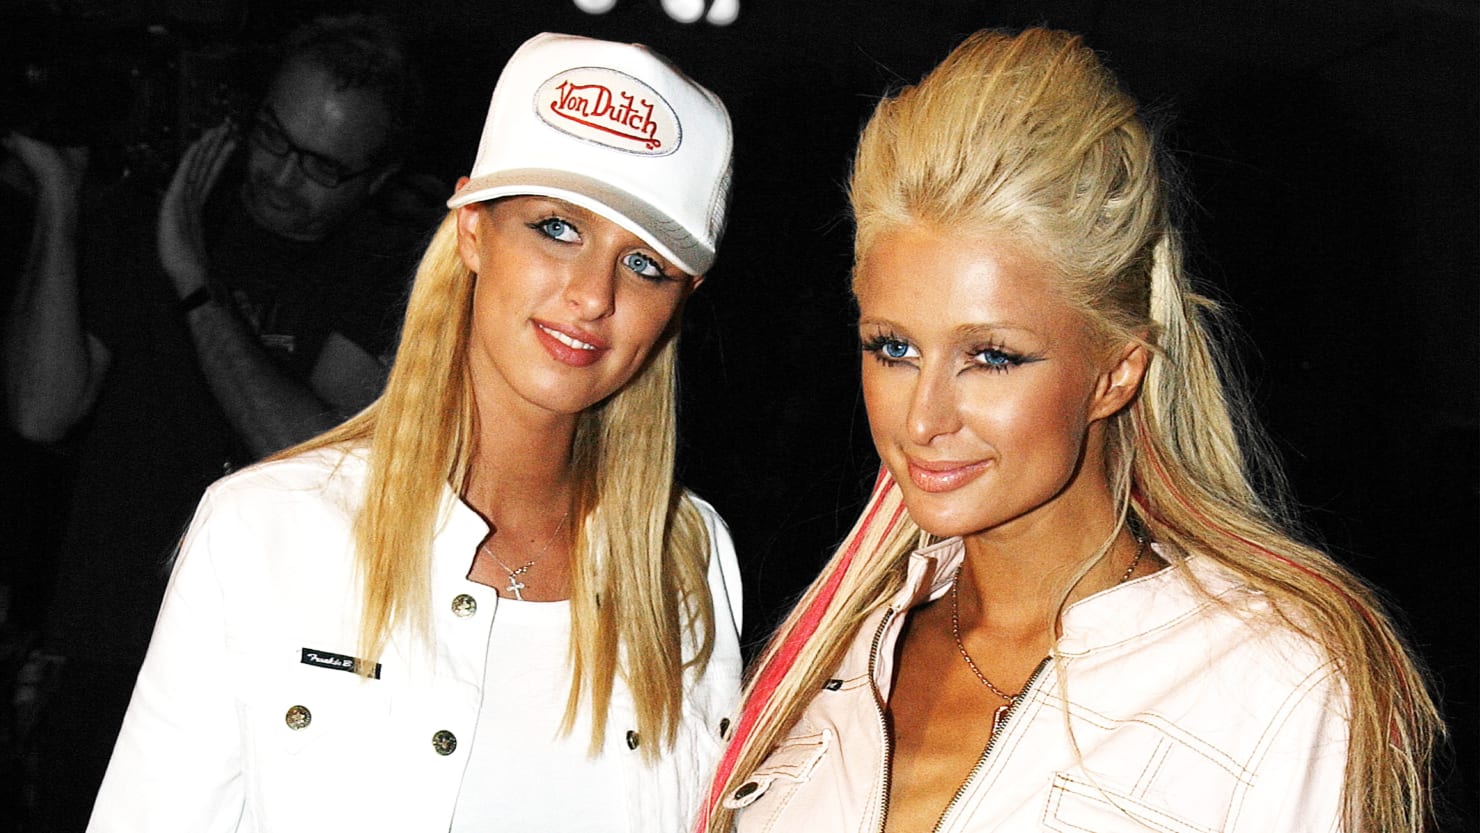 The Curse of Von Dutch May Be Our Next True Crime Obsession